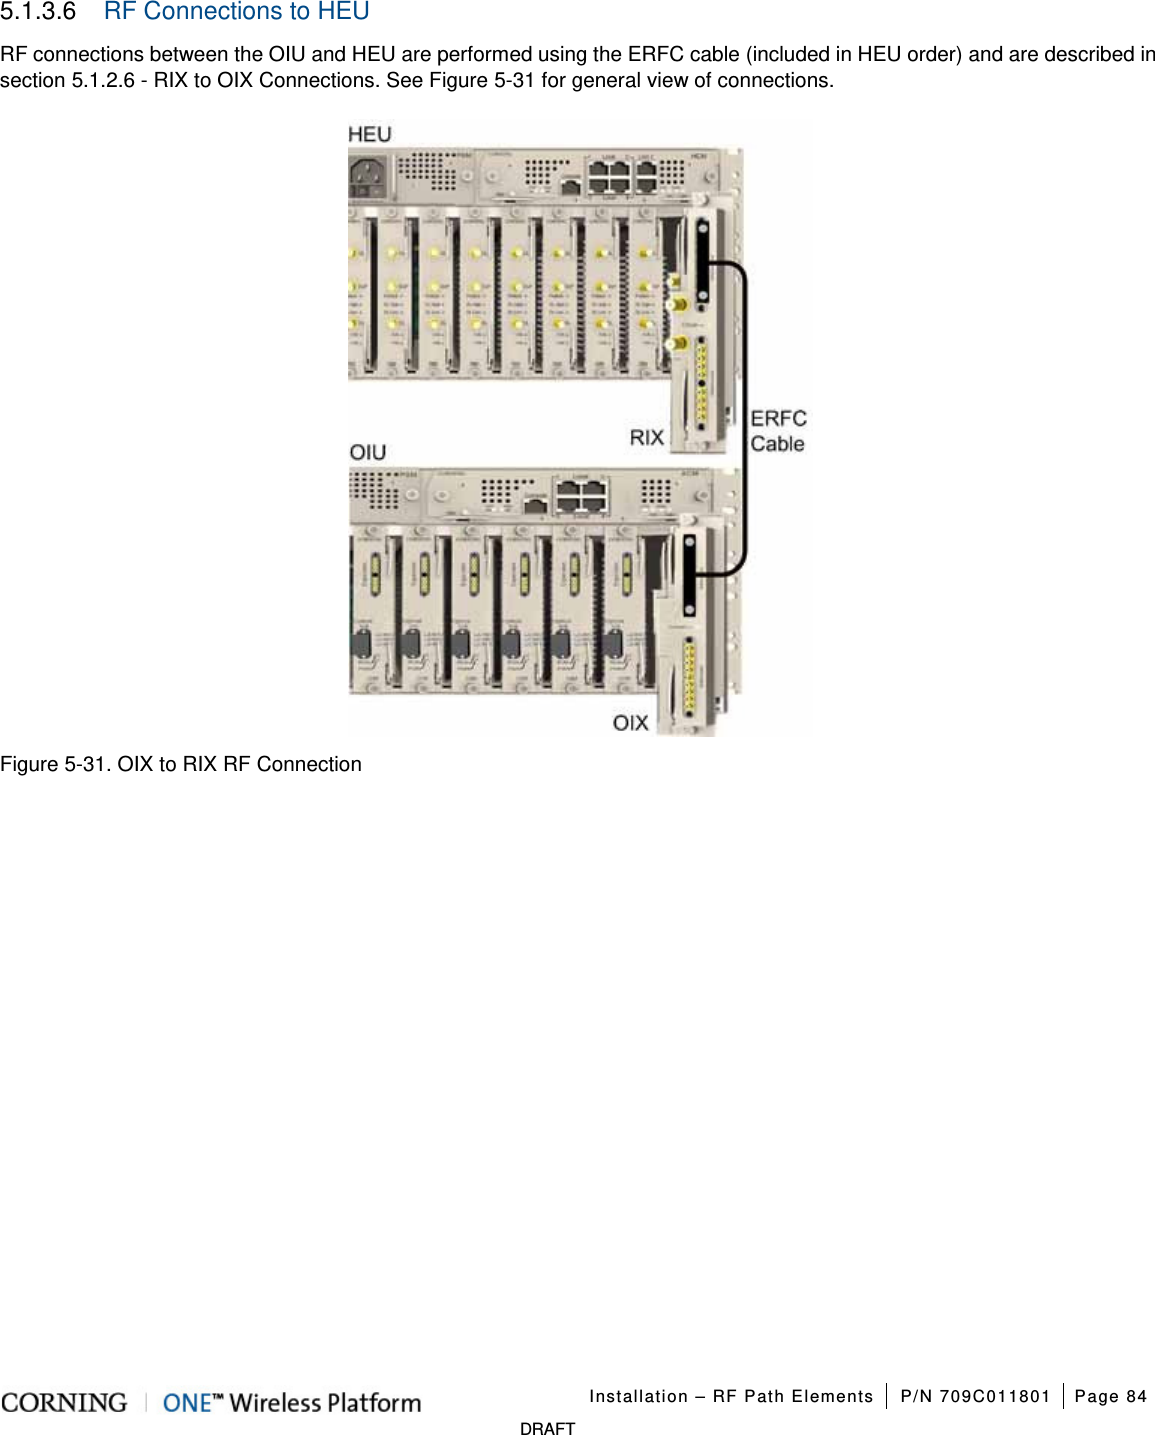   Installation – RF Path Elements P/N 709C011801 Page 84   DRAFT 5.1.3.6  RF Connections to HEU   RF connections between the OIU and HEU are performed using the ERFC cable (included in HEU order) and are described in section  5.1.2.6 - RIX to OIX Connections. See Figure  5-31 for general view of connections.  Figure  5-31. OIX to RIX RF Connection    